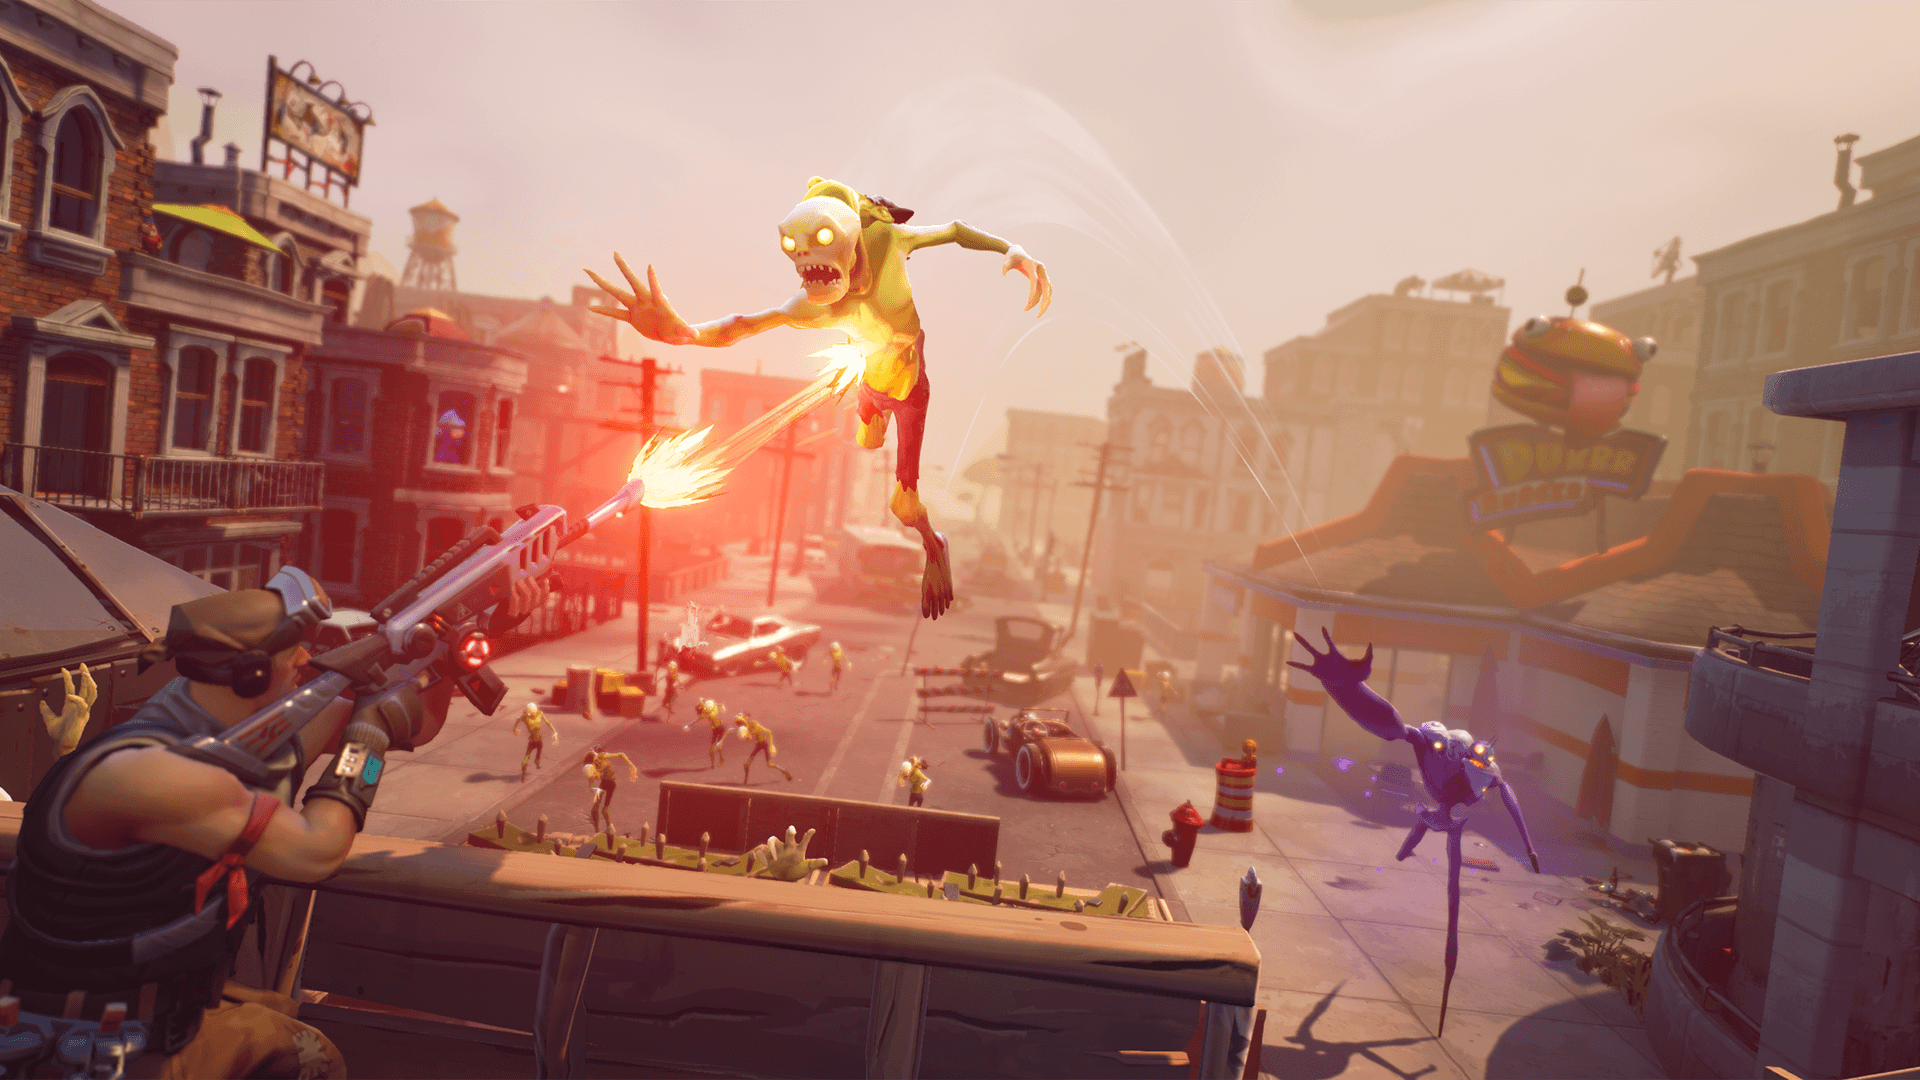 Hands On: Fortnite Is An Overwhelming Zombie Defense